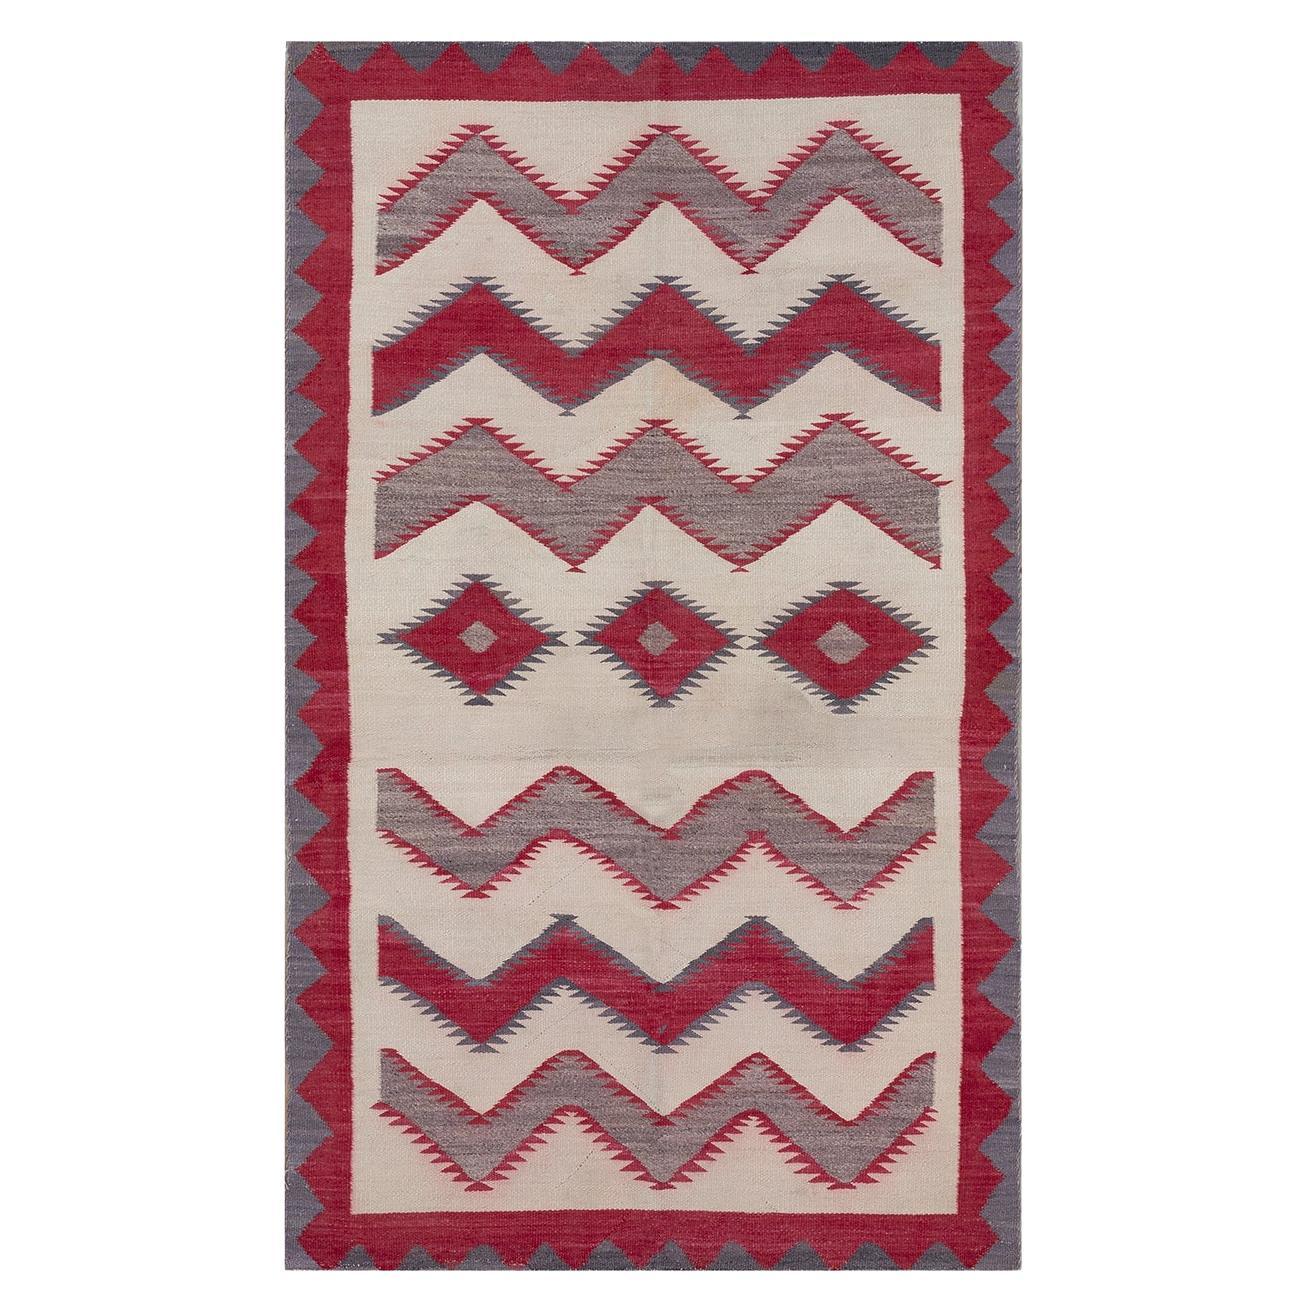 Early 20th Century American Navajo Carpet ( 3'7" x 6' - 109 x 183 ) For Sale